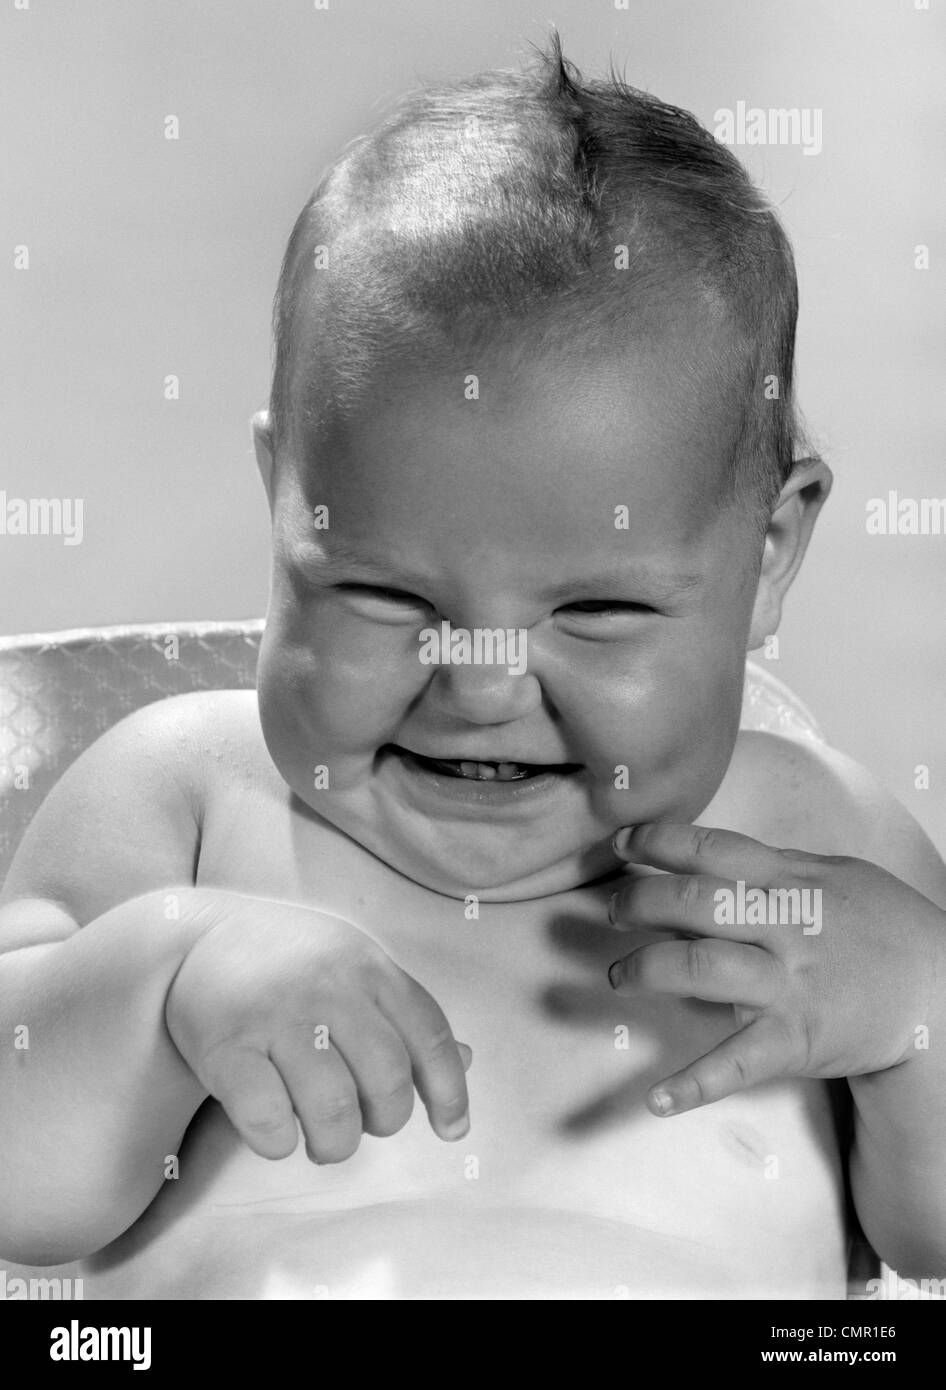 1960s PORTRAIT OF SMILING BABY INDOOR MAKING A FUNNY FACE Stock Photo